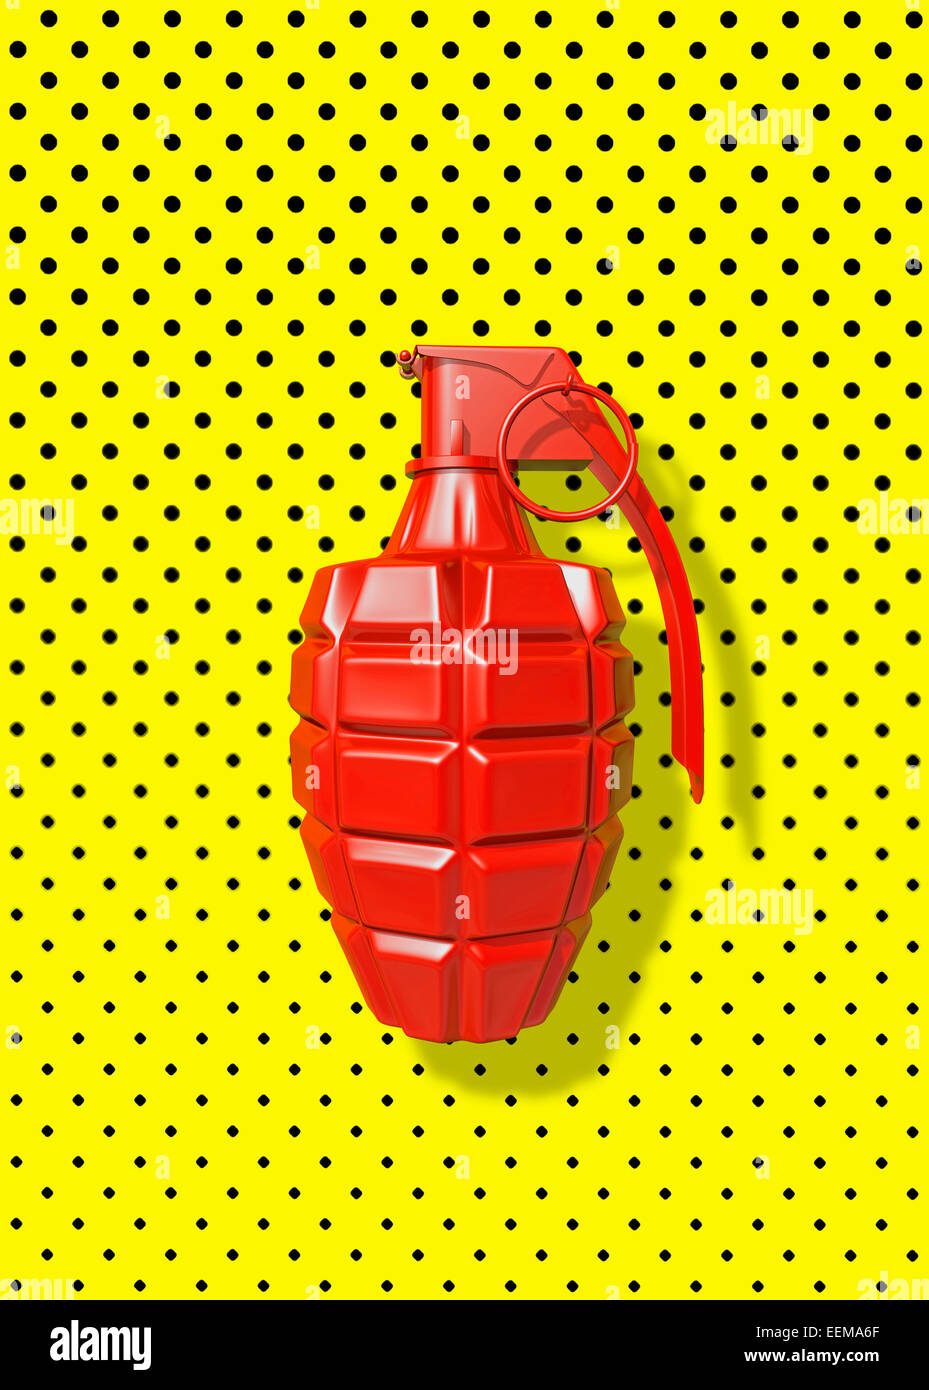 Close up of red grenade on polka dot background Stock Photo